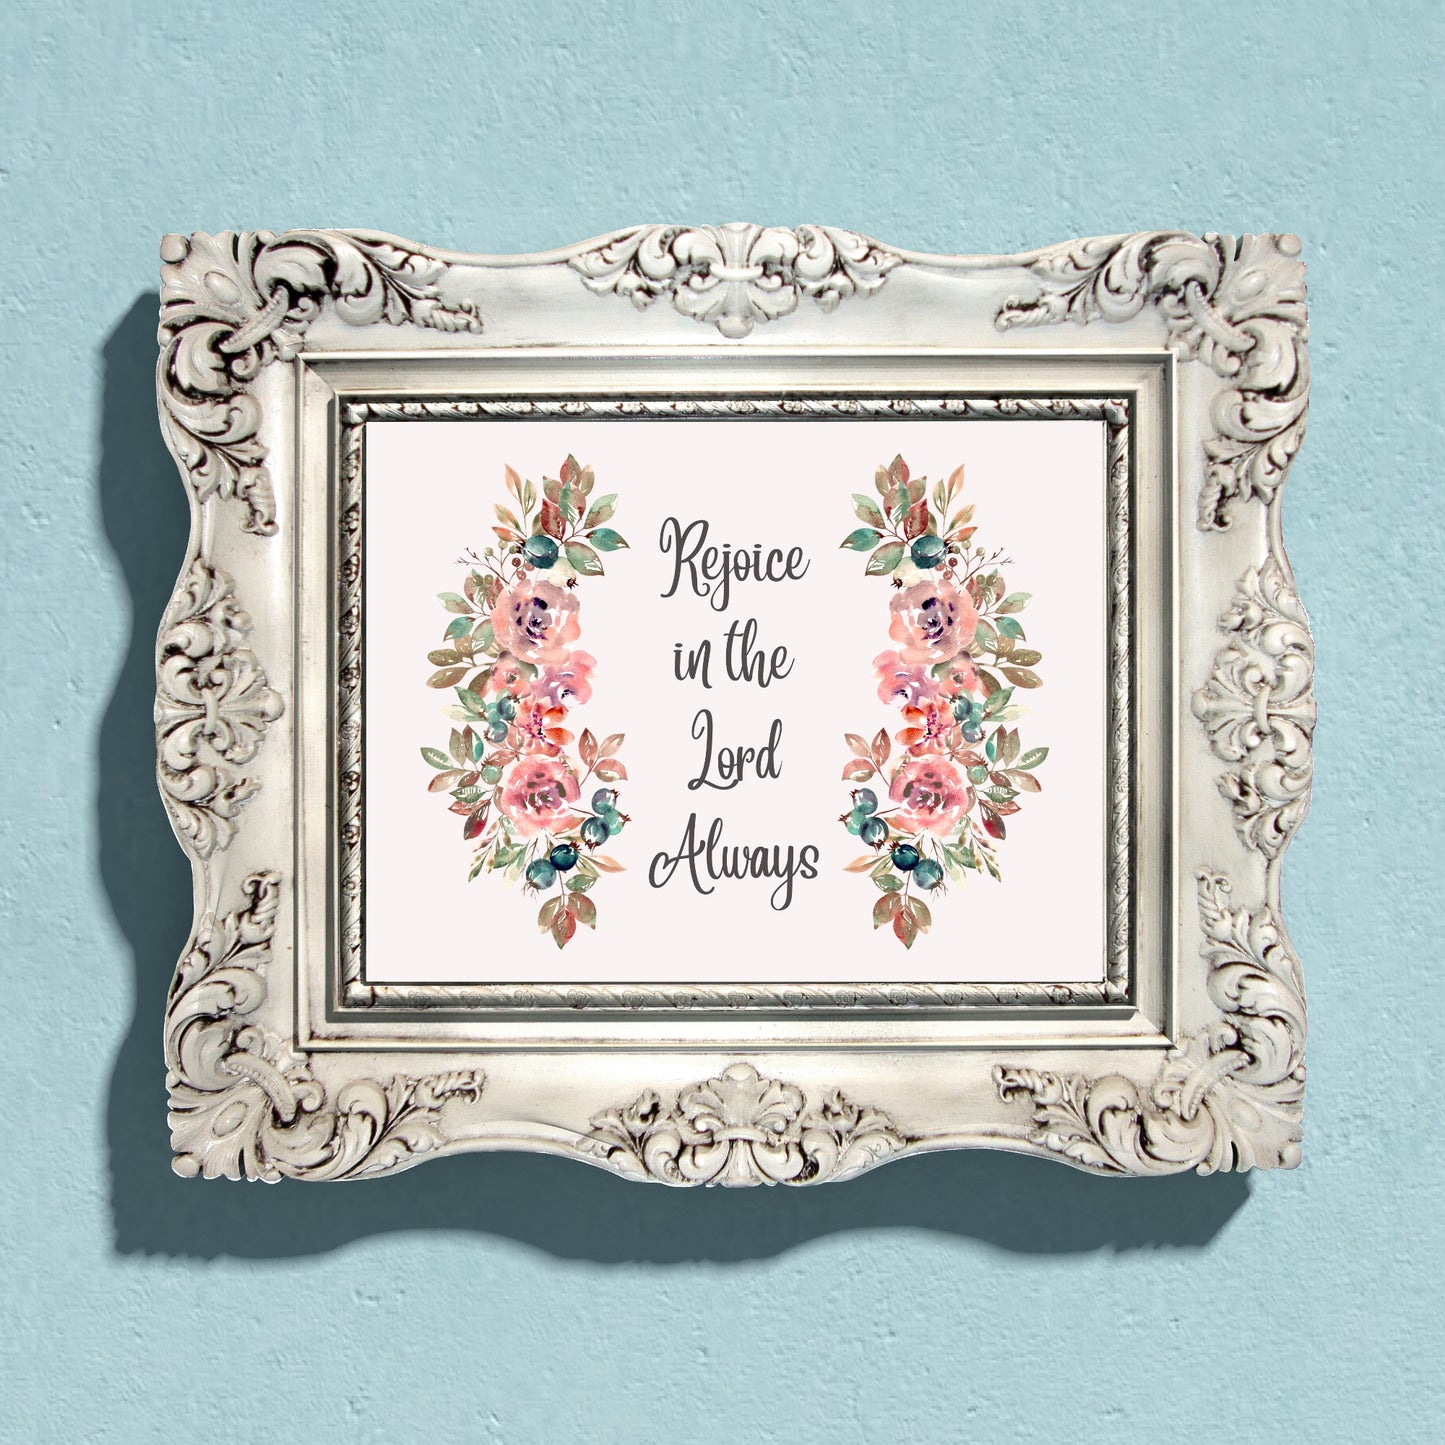 Inspirational Word Art - Rejoice in the Lord Always - Vintage Style Wall Decor (8x10 print) | Vintage Style Floral Wall Art shown in ornate frame | oak7west.com